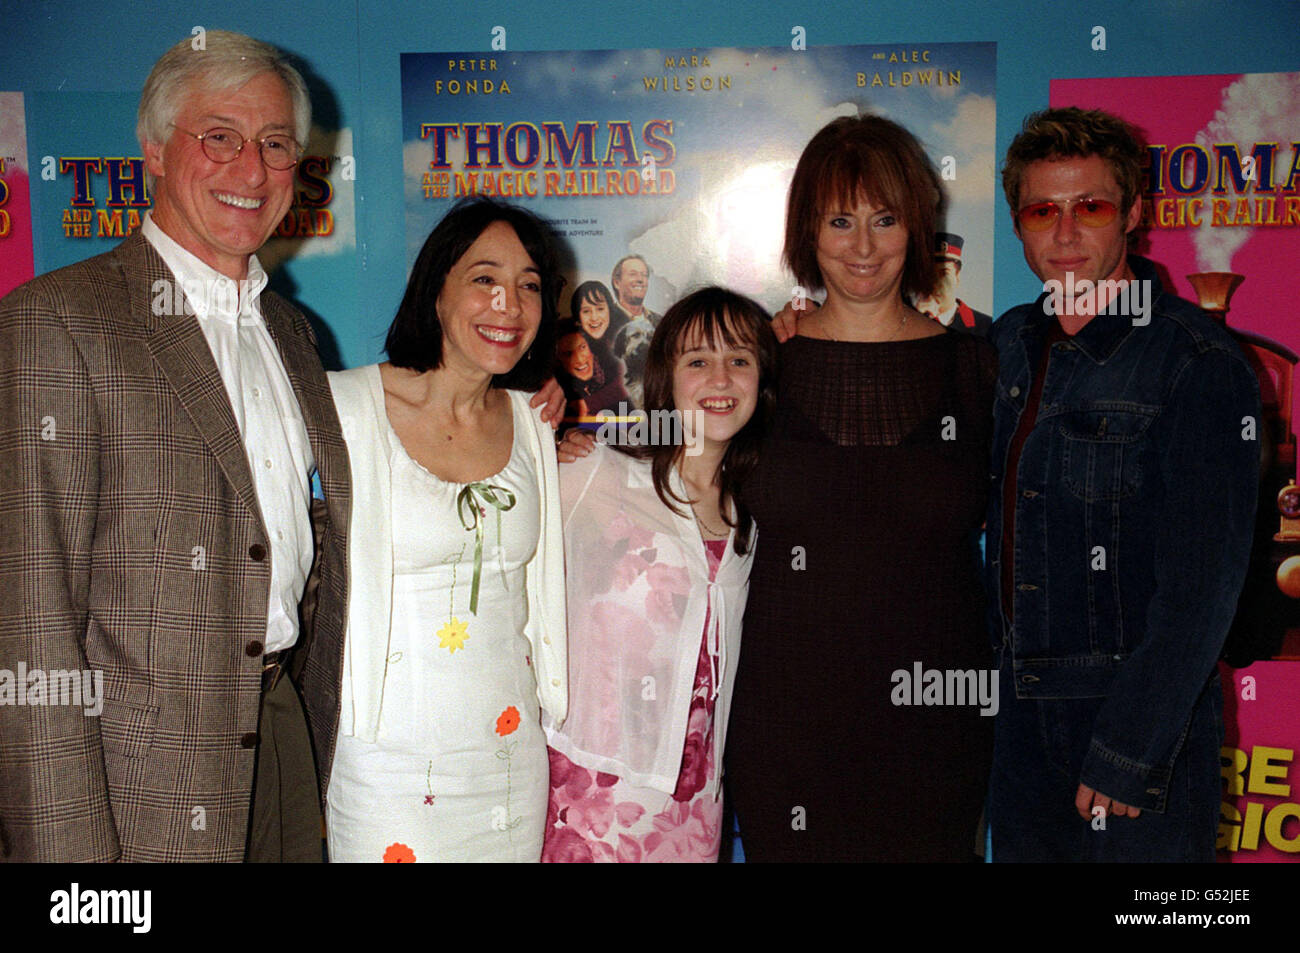 Stars of the film at the world charity premiere of Thomas and the Magic Railroad. Actress Didi Conn (2nd L), Mara Wilson (centre), producer, writer and director Britt Allcroft, and actor Michael Rodgers (R), at the Odeon cinema, in London's Leicester Square. Stock Photo